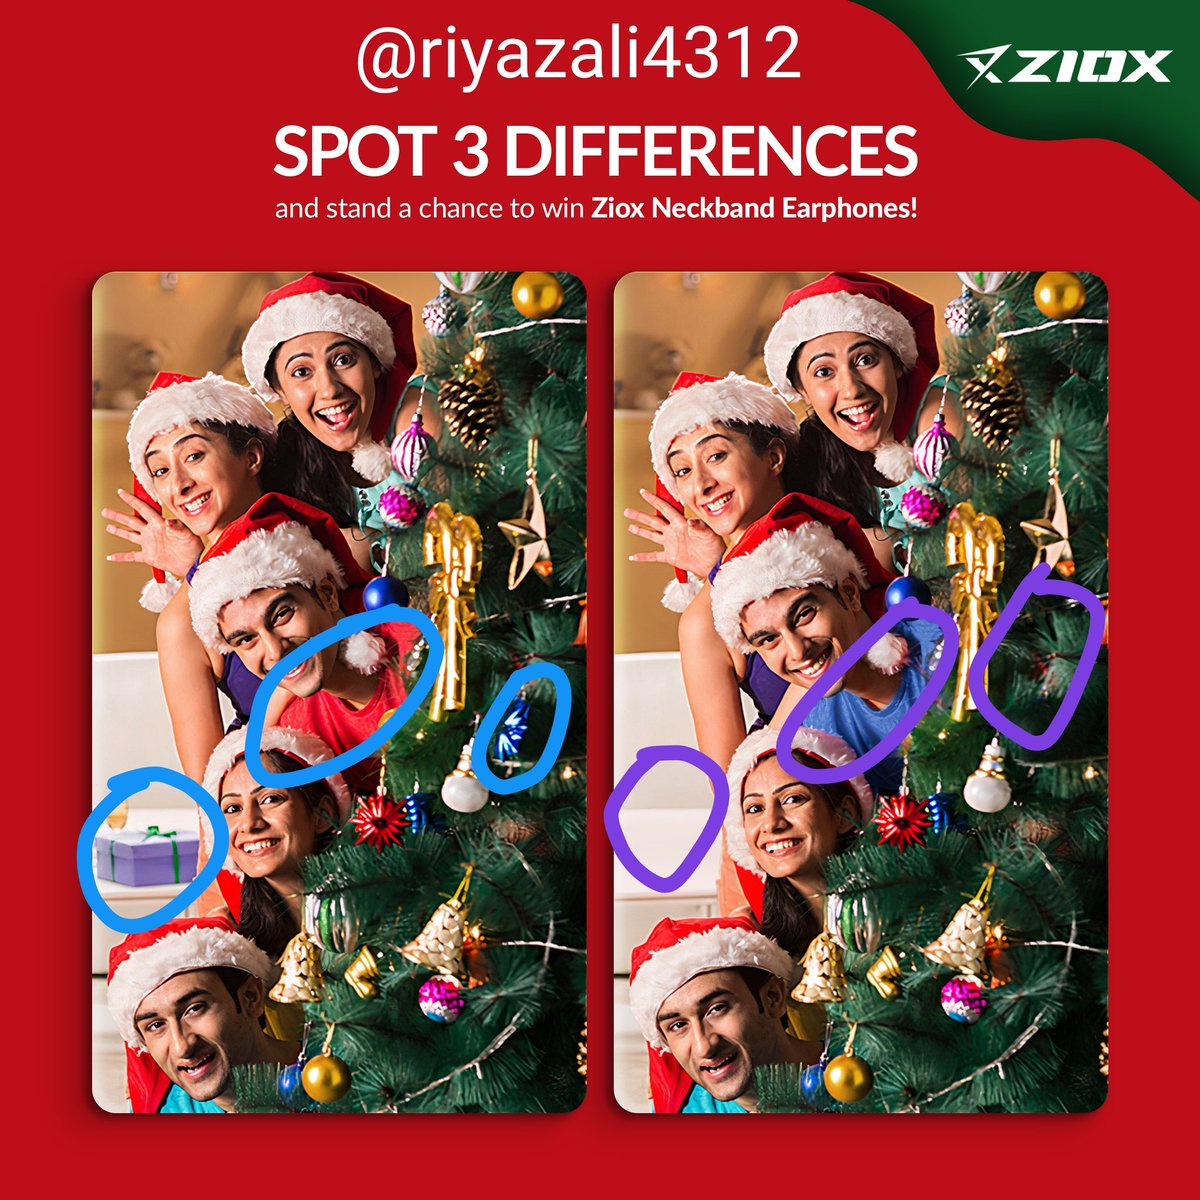 @Zioxofficial 1) T-Shirts colour is different in both pic
2) Gift box & Wine Glass is missing
3) Blue Christmas Ornament is missing

#XmasContest #ChristmasContest 
#BluetoothNeckband #Ziox #ContestAlert @Zioxofficial 

@Officialy_Sana @Deepaadhan3 @PinkyDholakia